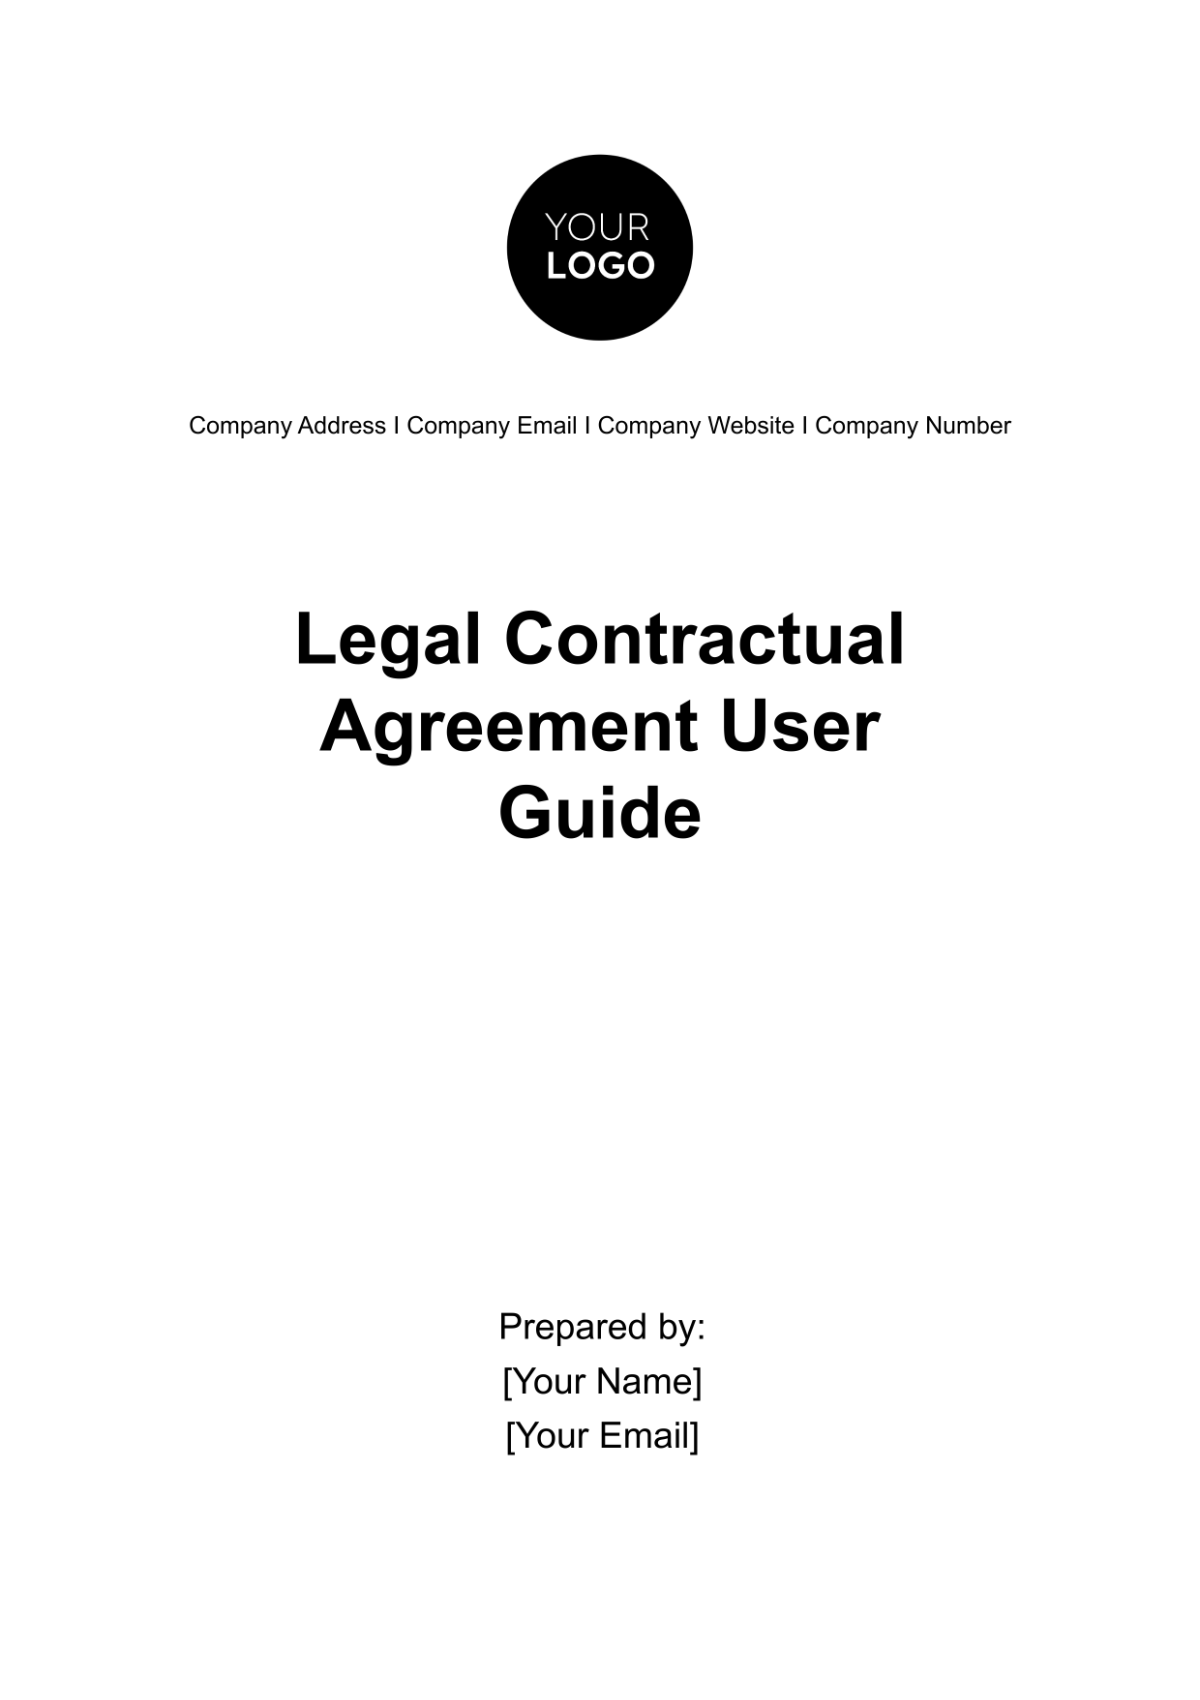 Legal Contractual Agreement User Guide Template